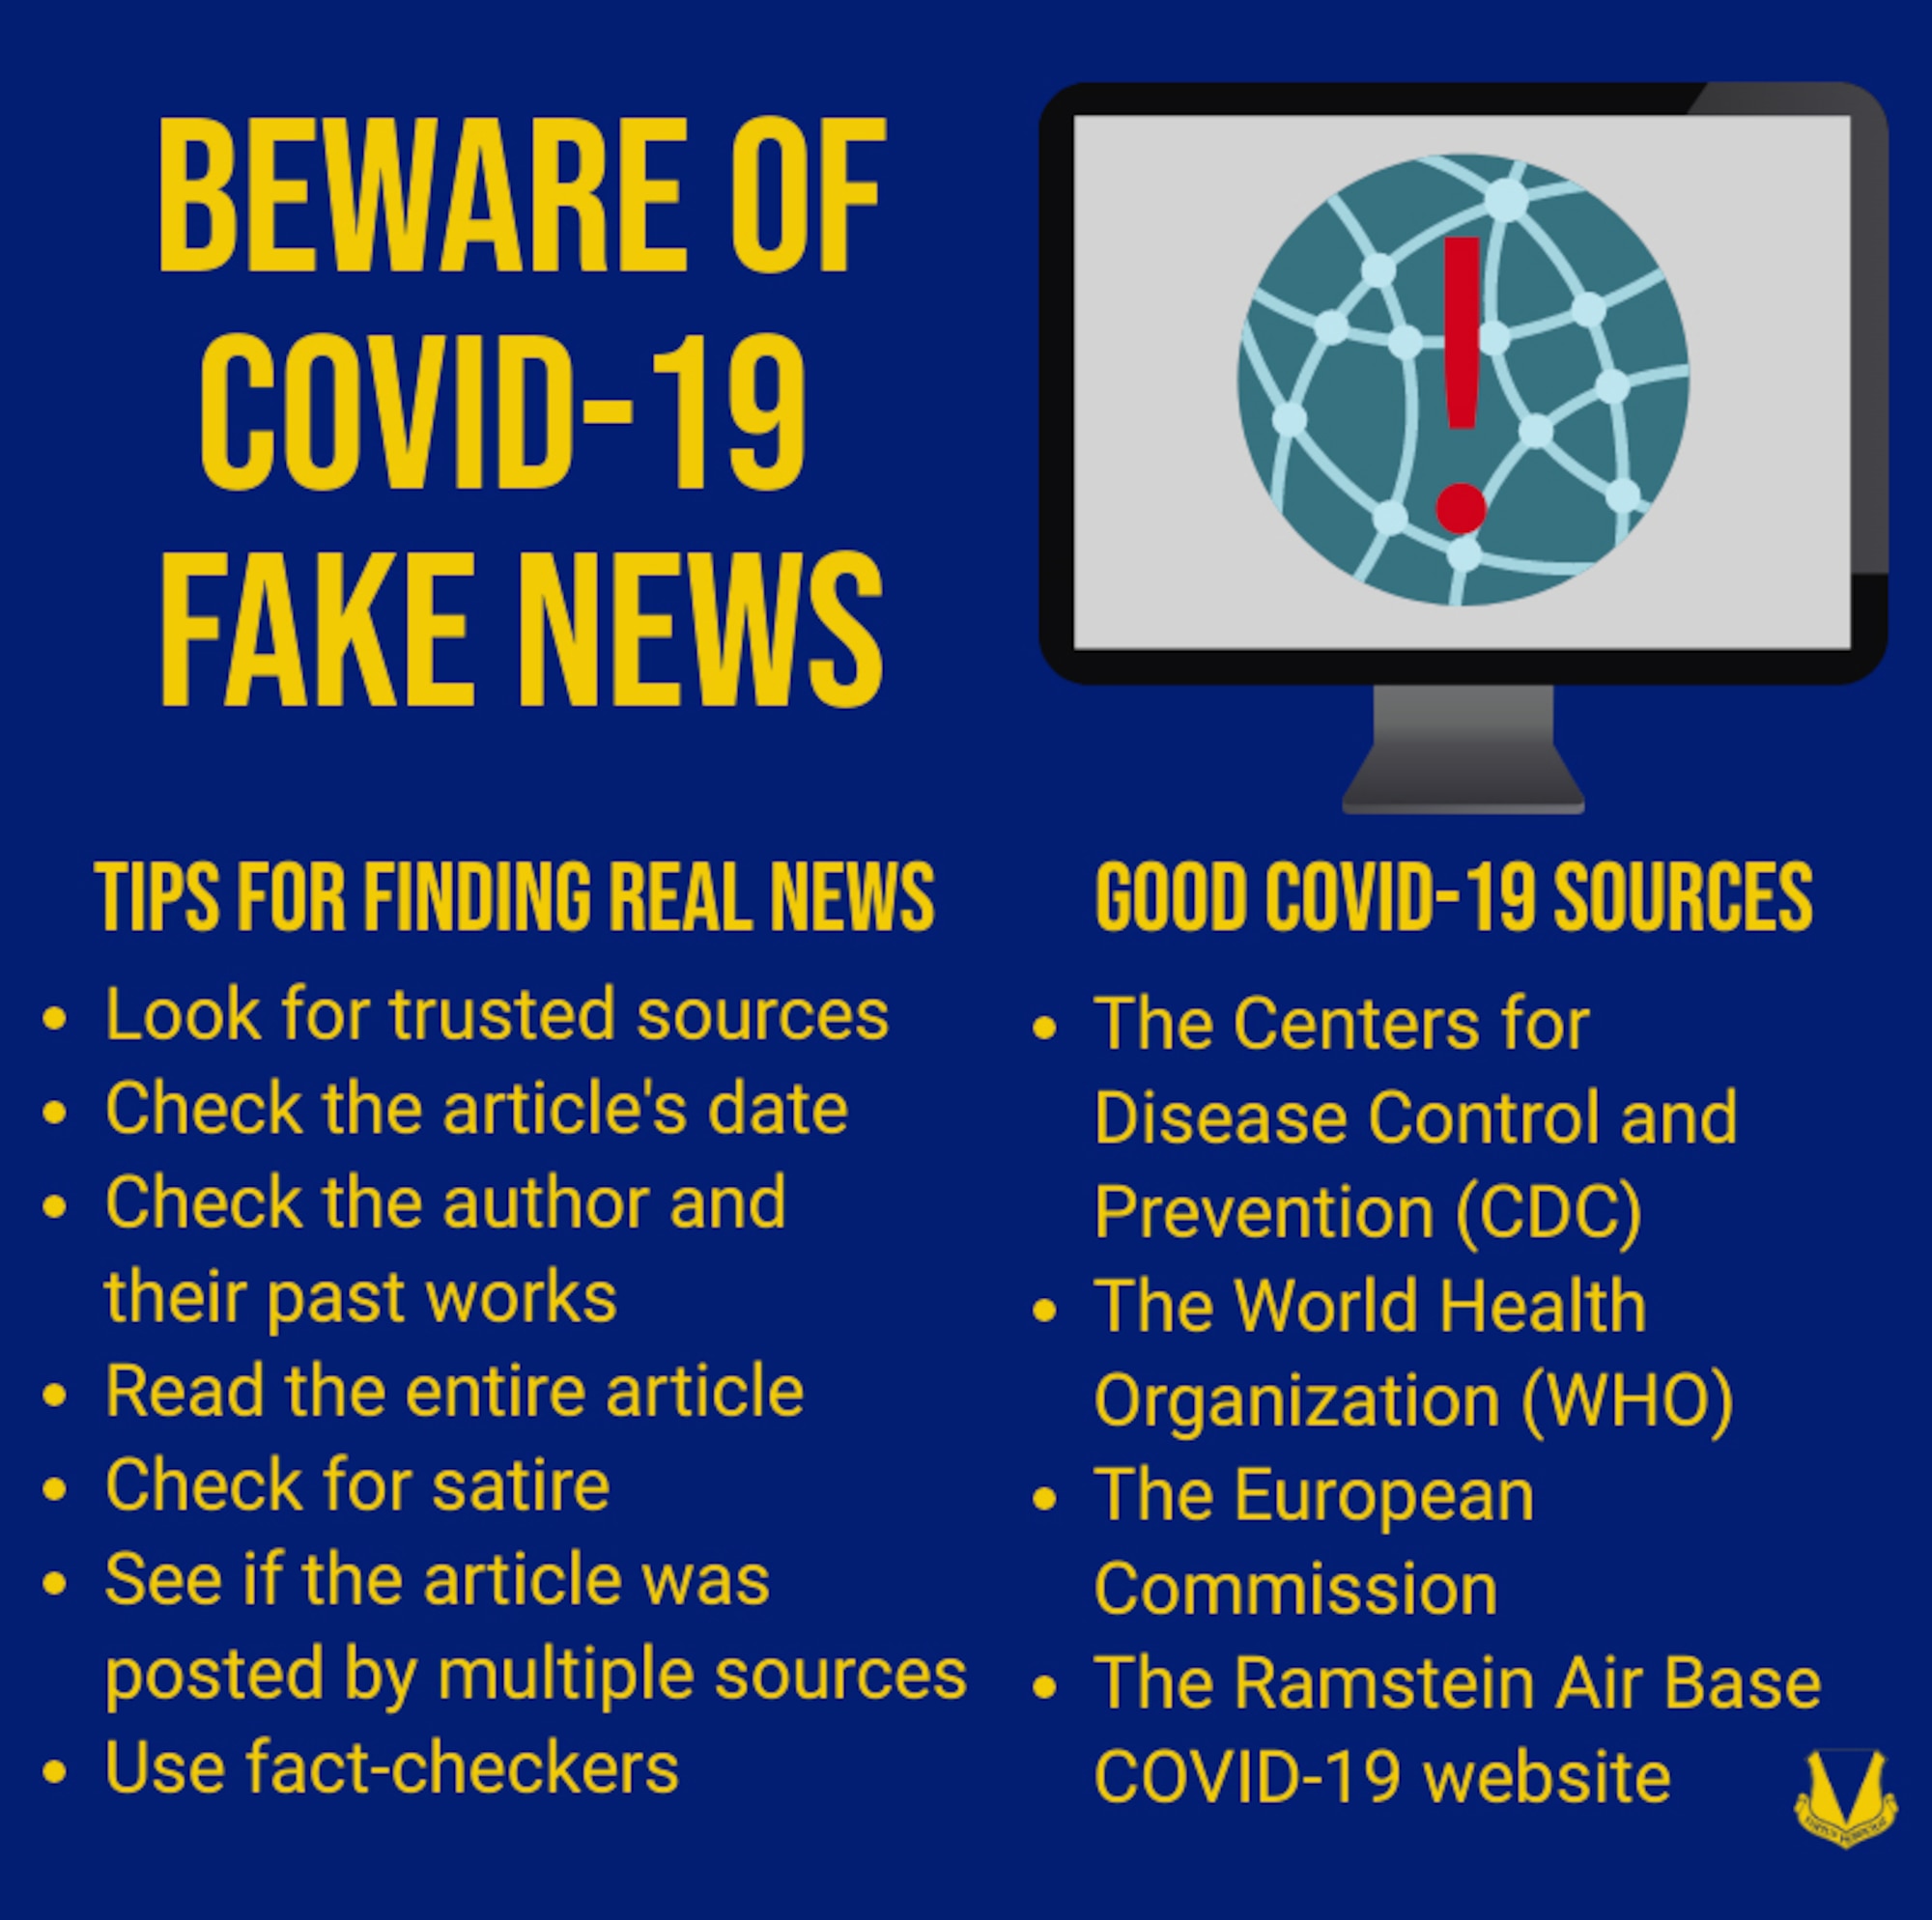 A graphic displaying good sources of COVID-19 news and tips for finding real news.